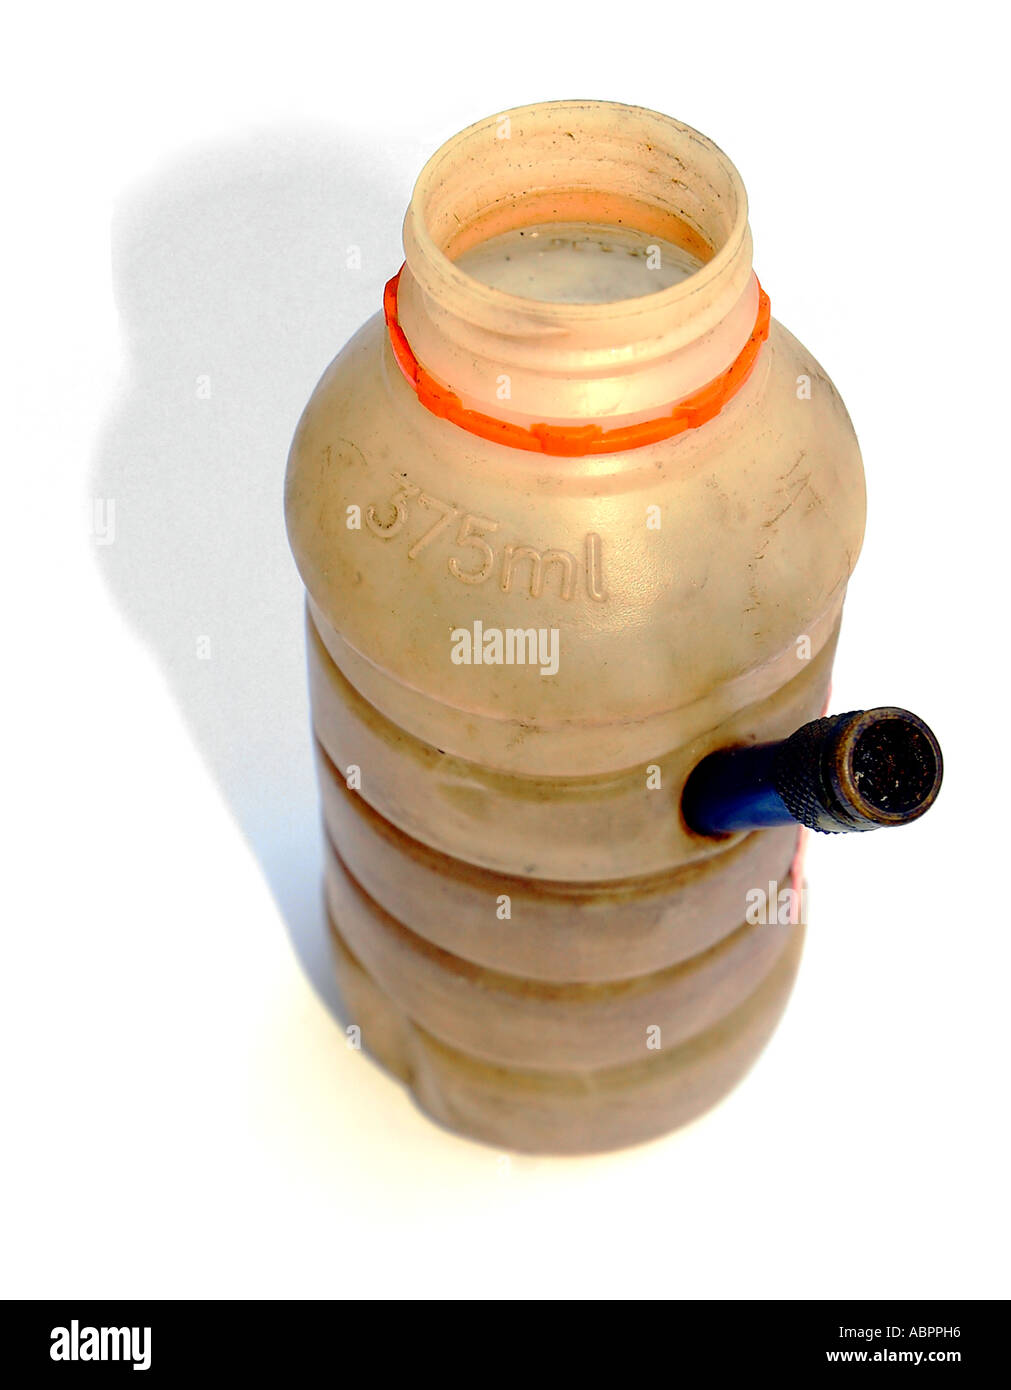 Horrid old homemade bong for marijuana smoking made from a plastic drink  bottle and rubber pipe Stock Photo - Alamy